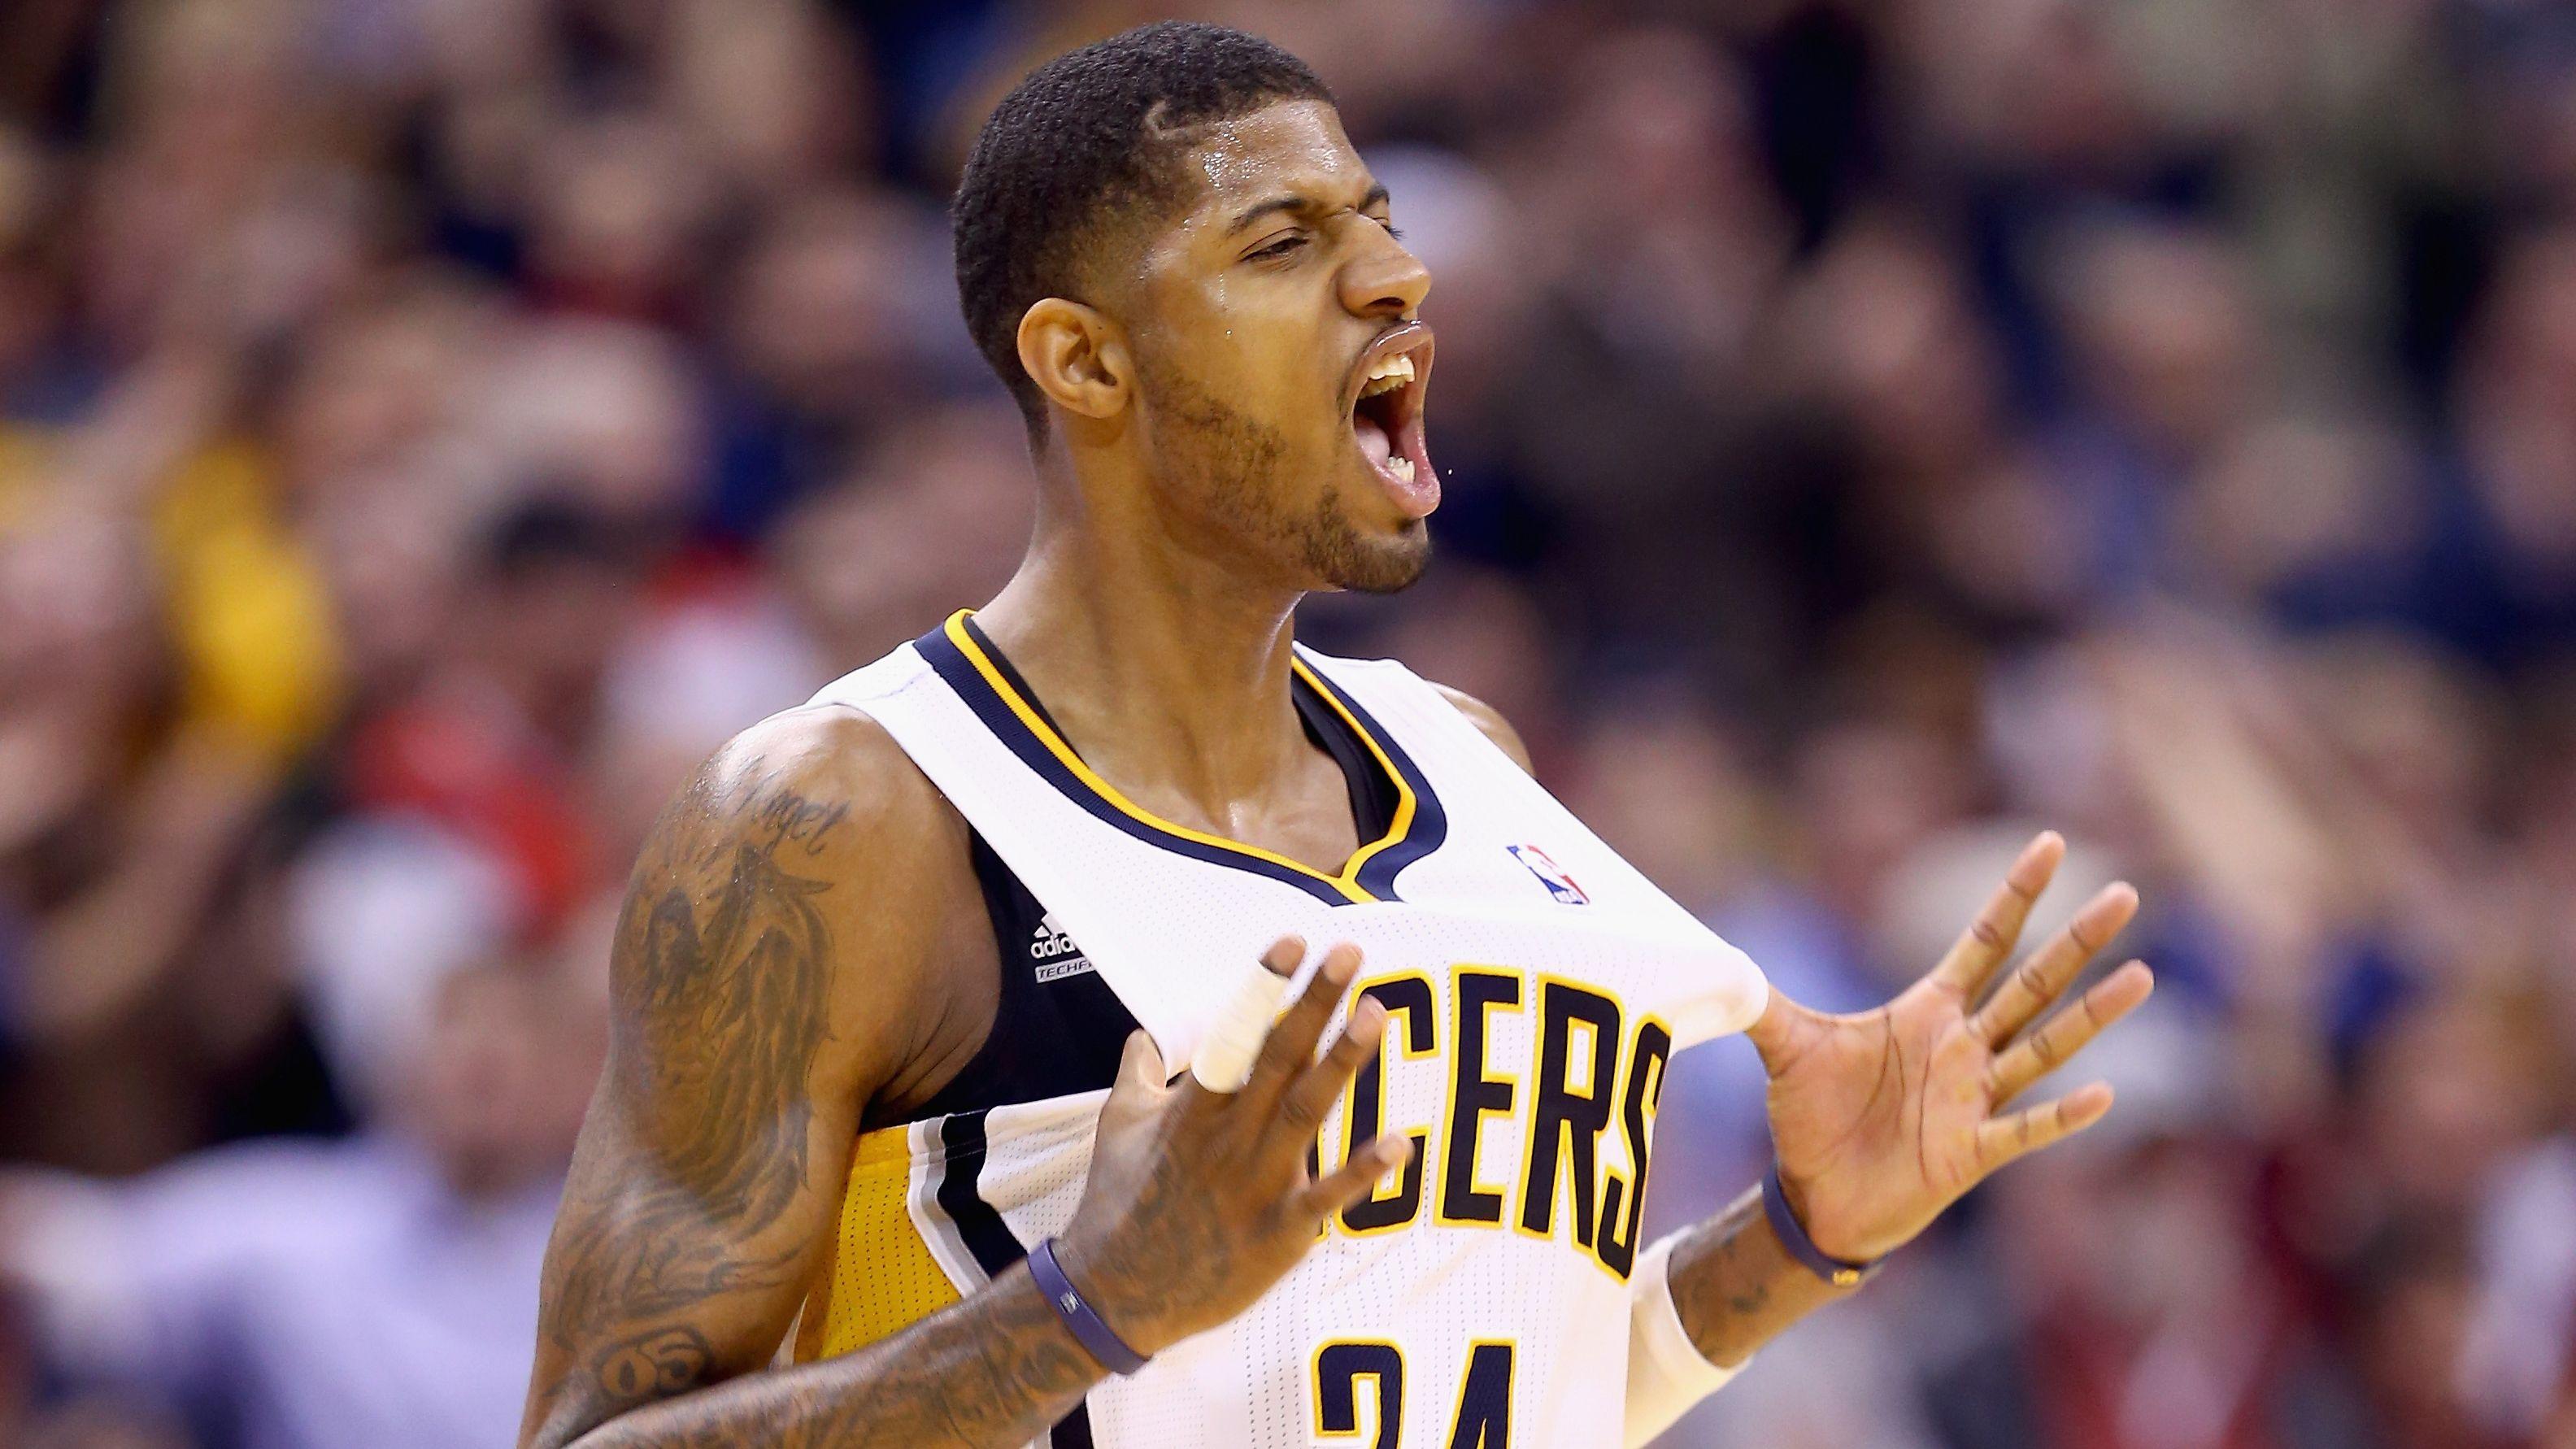 Awesome Paul George picture